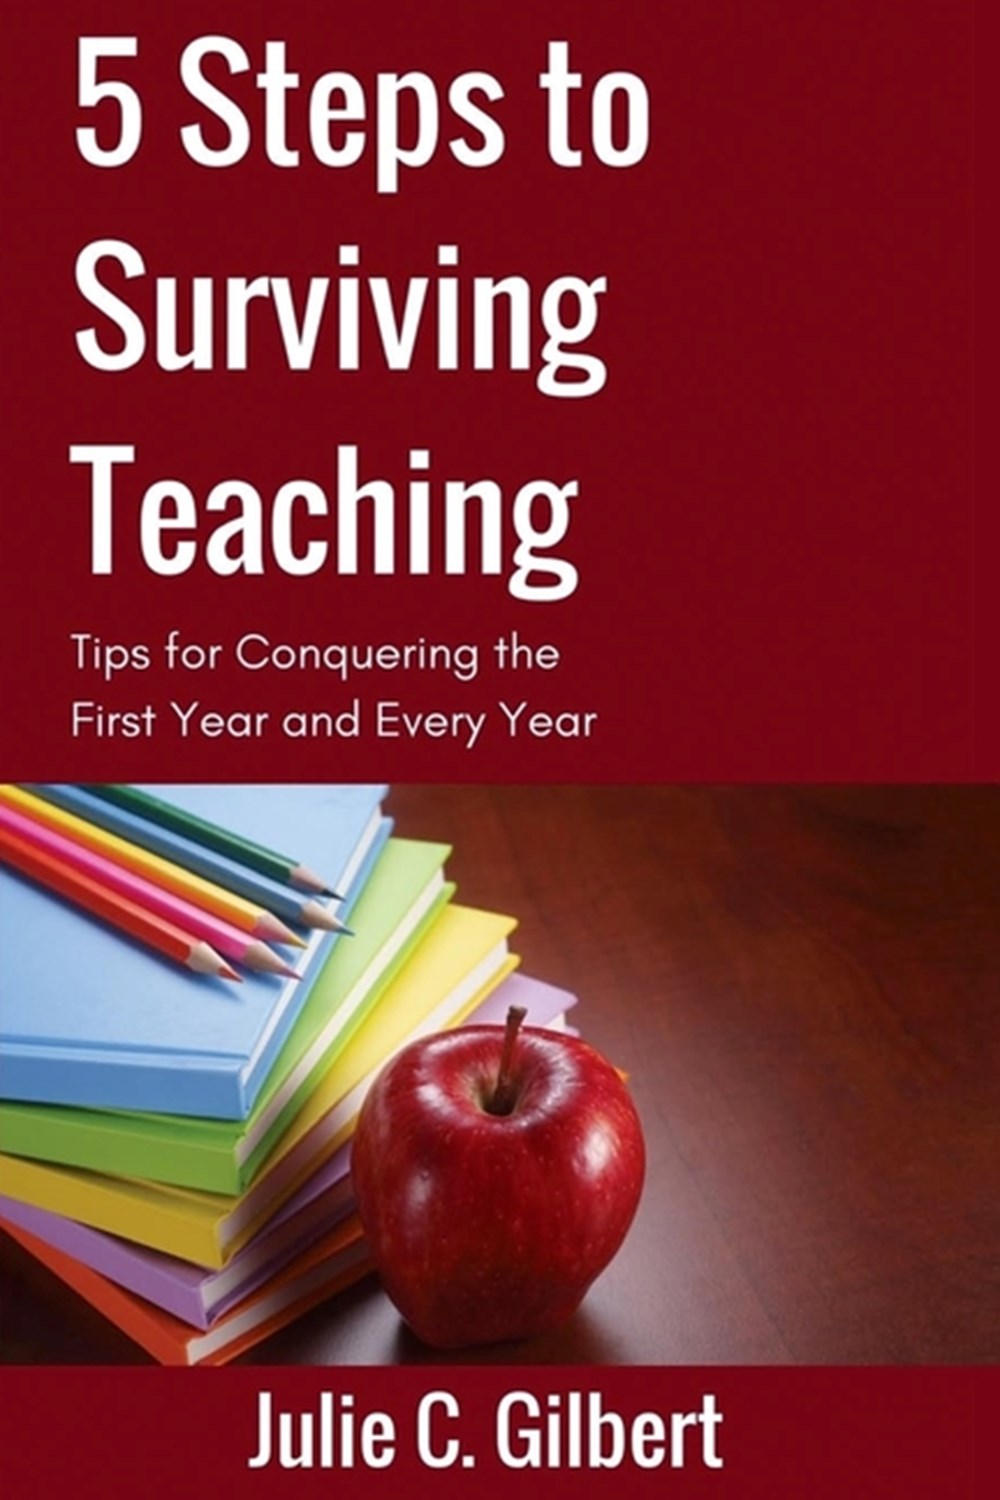 5 Steps to Surviving Teaching: Tips for Conquering the First Year and Every Year